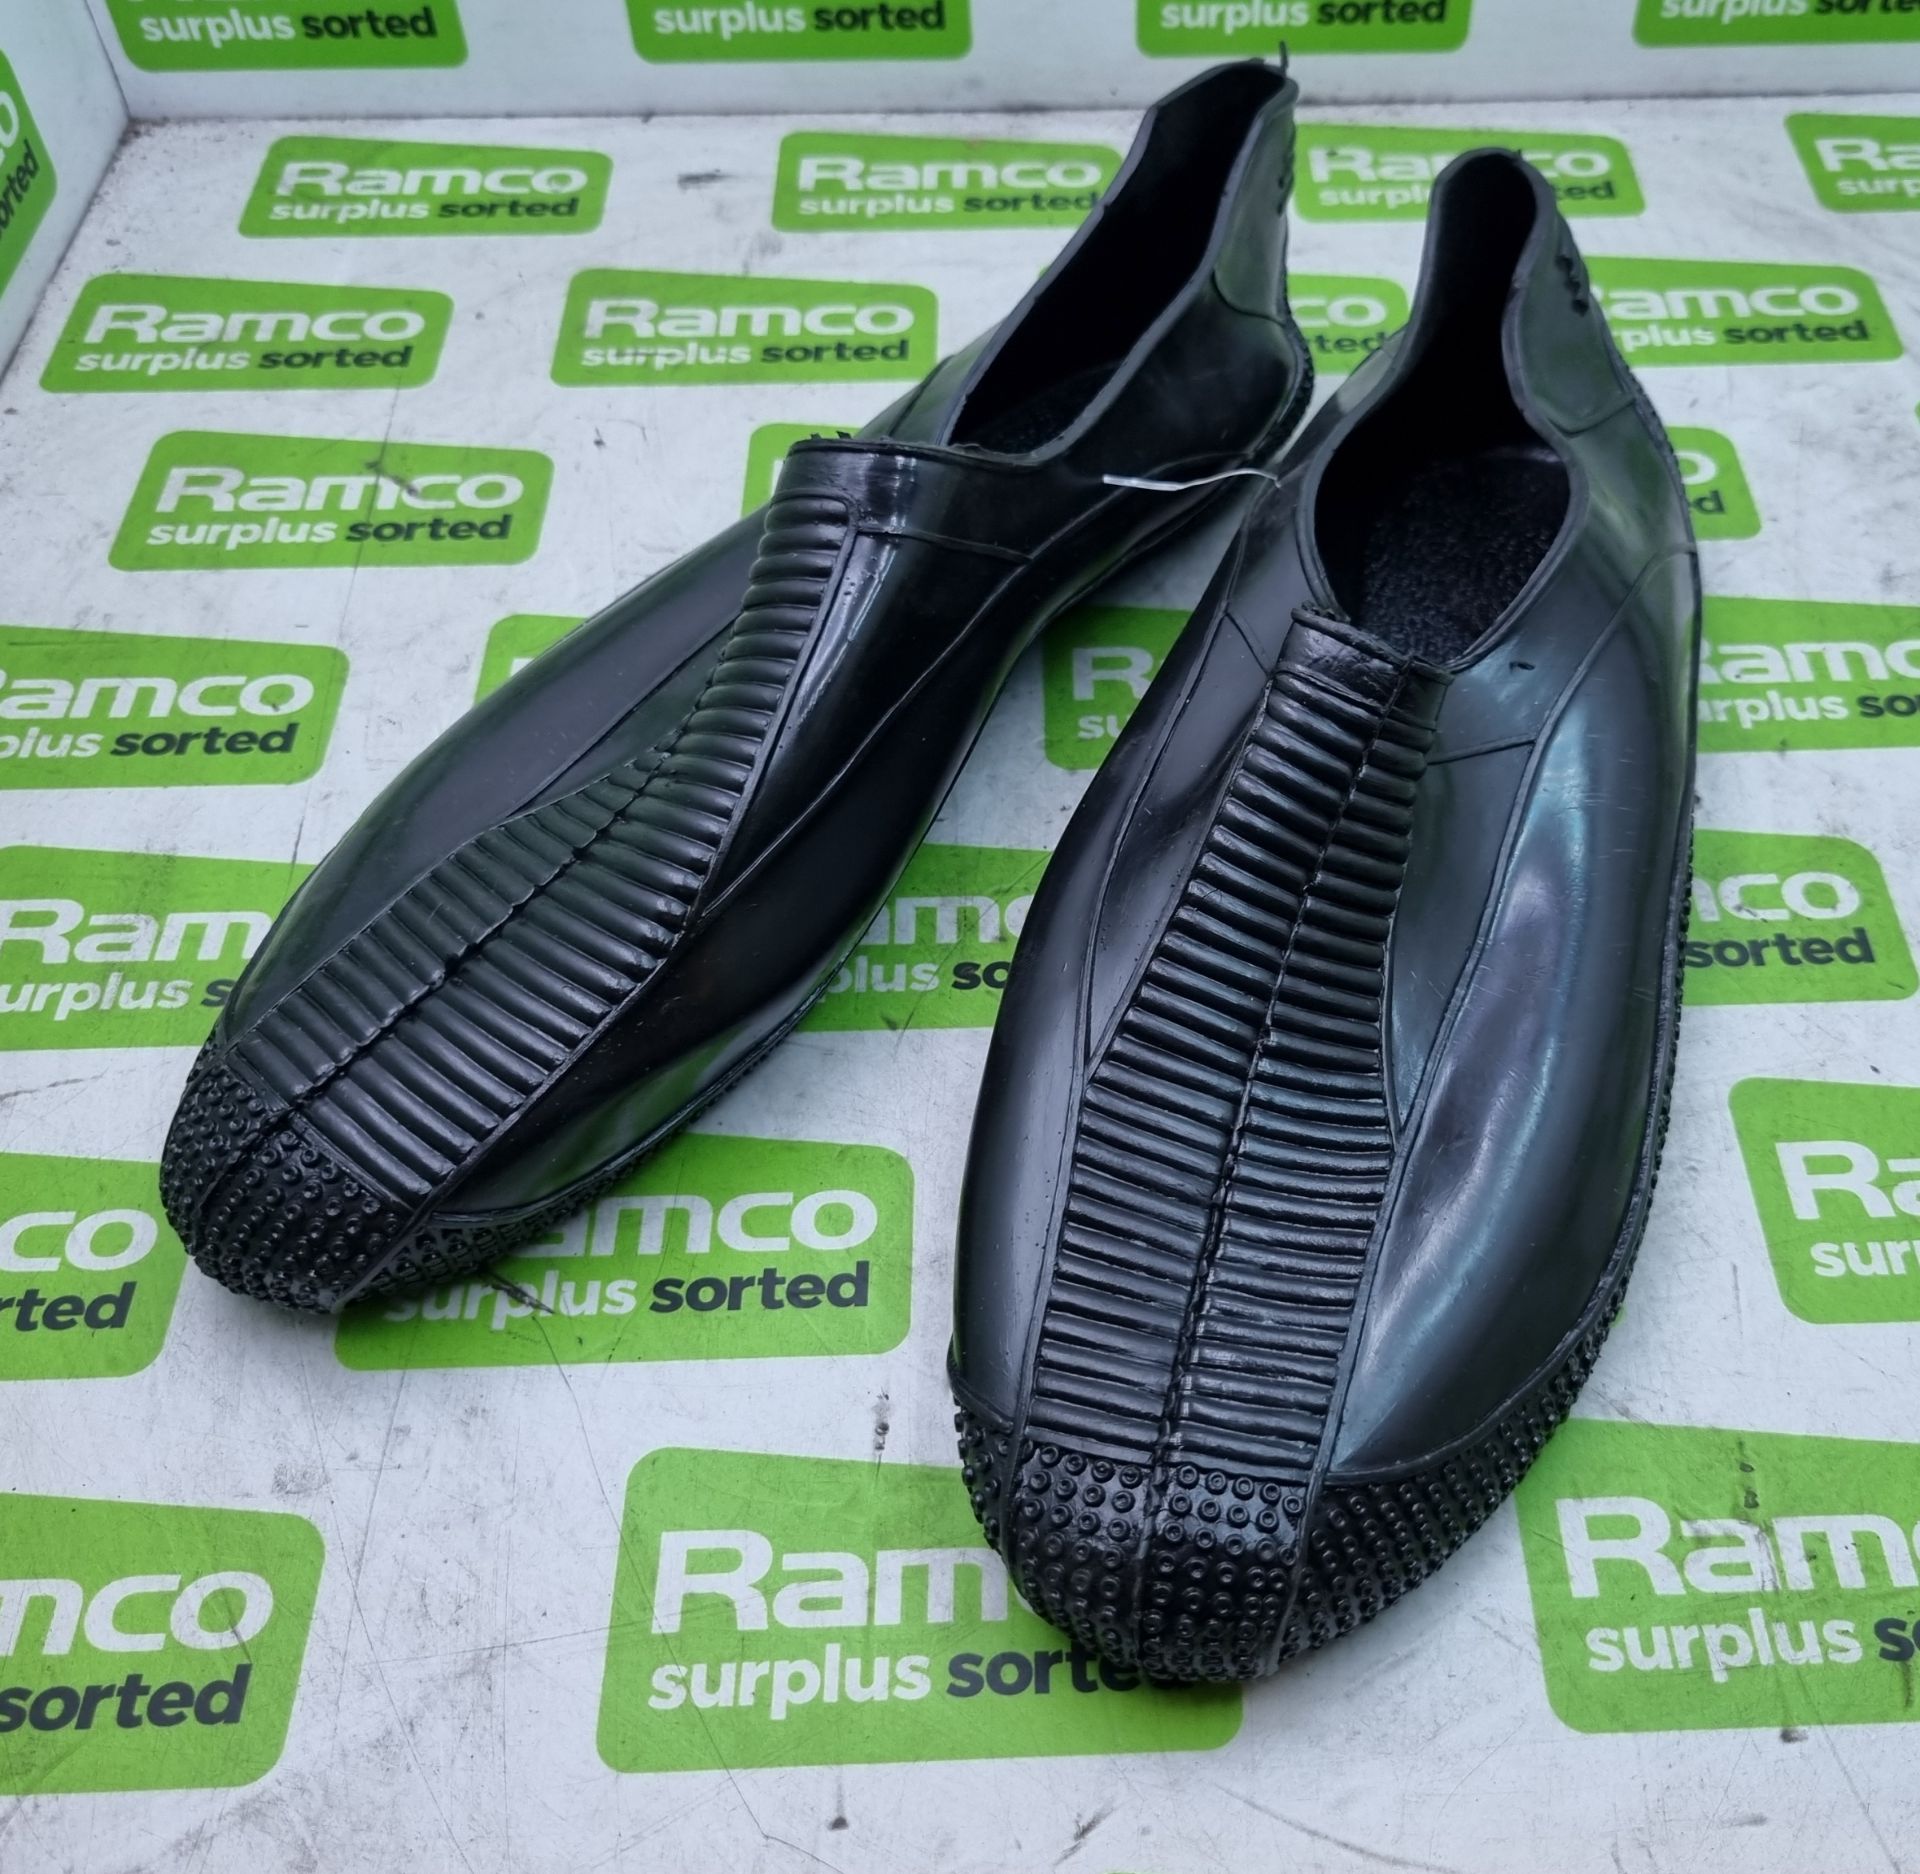 6x Pairs of Rubber shoes - size: UK 11, EU 46 - Image 2 of 5